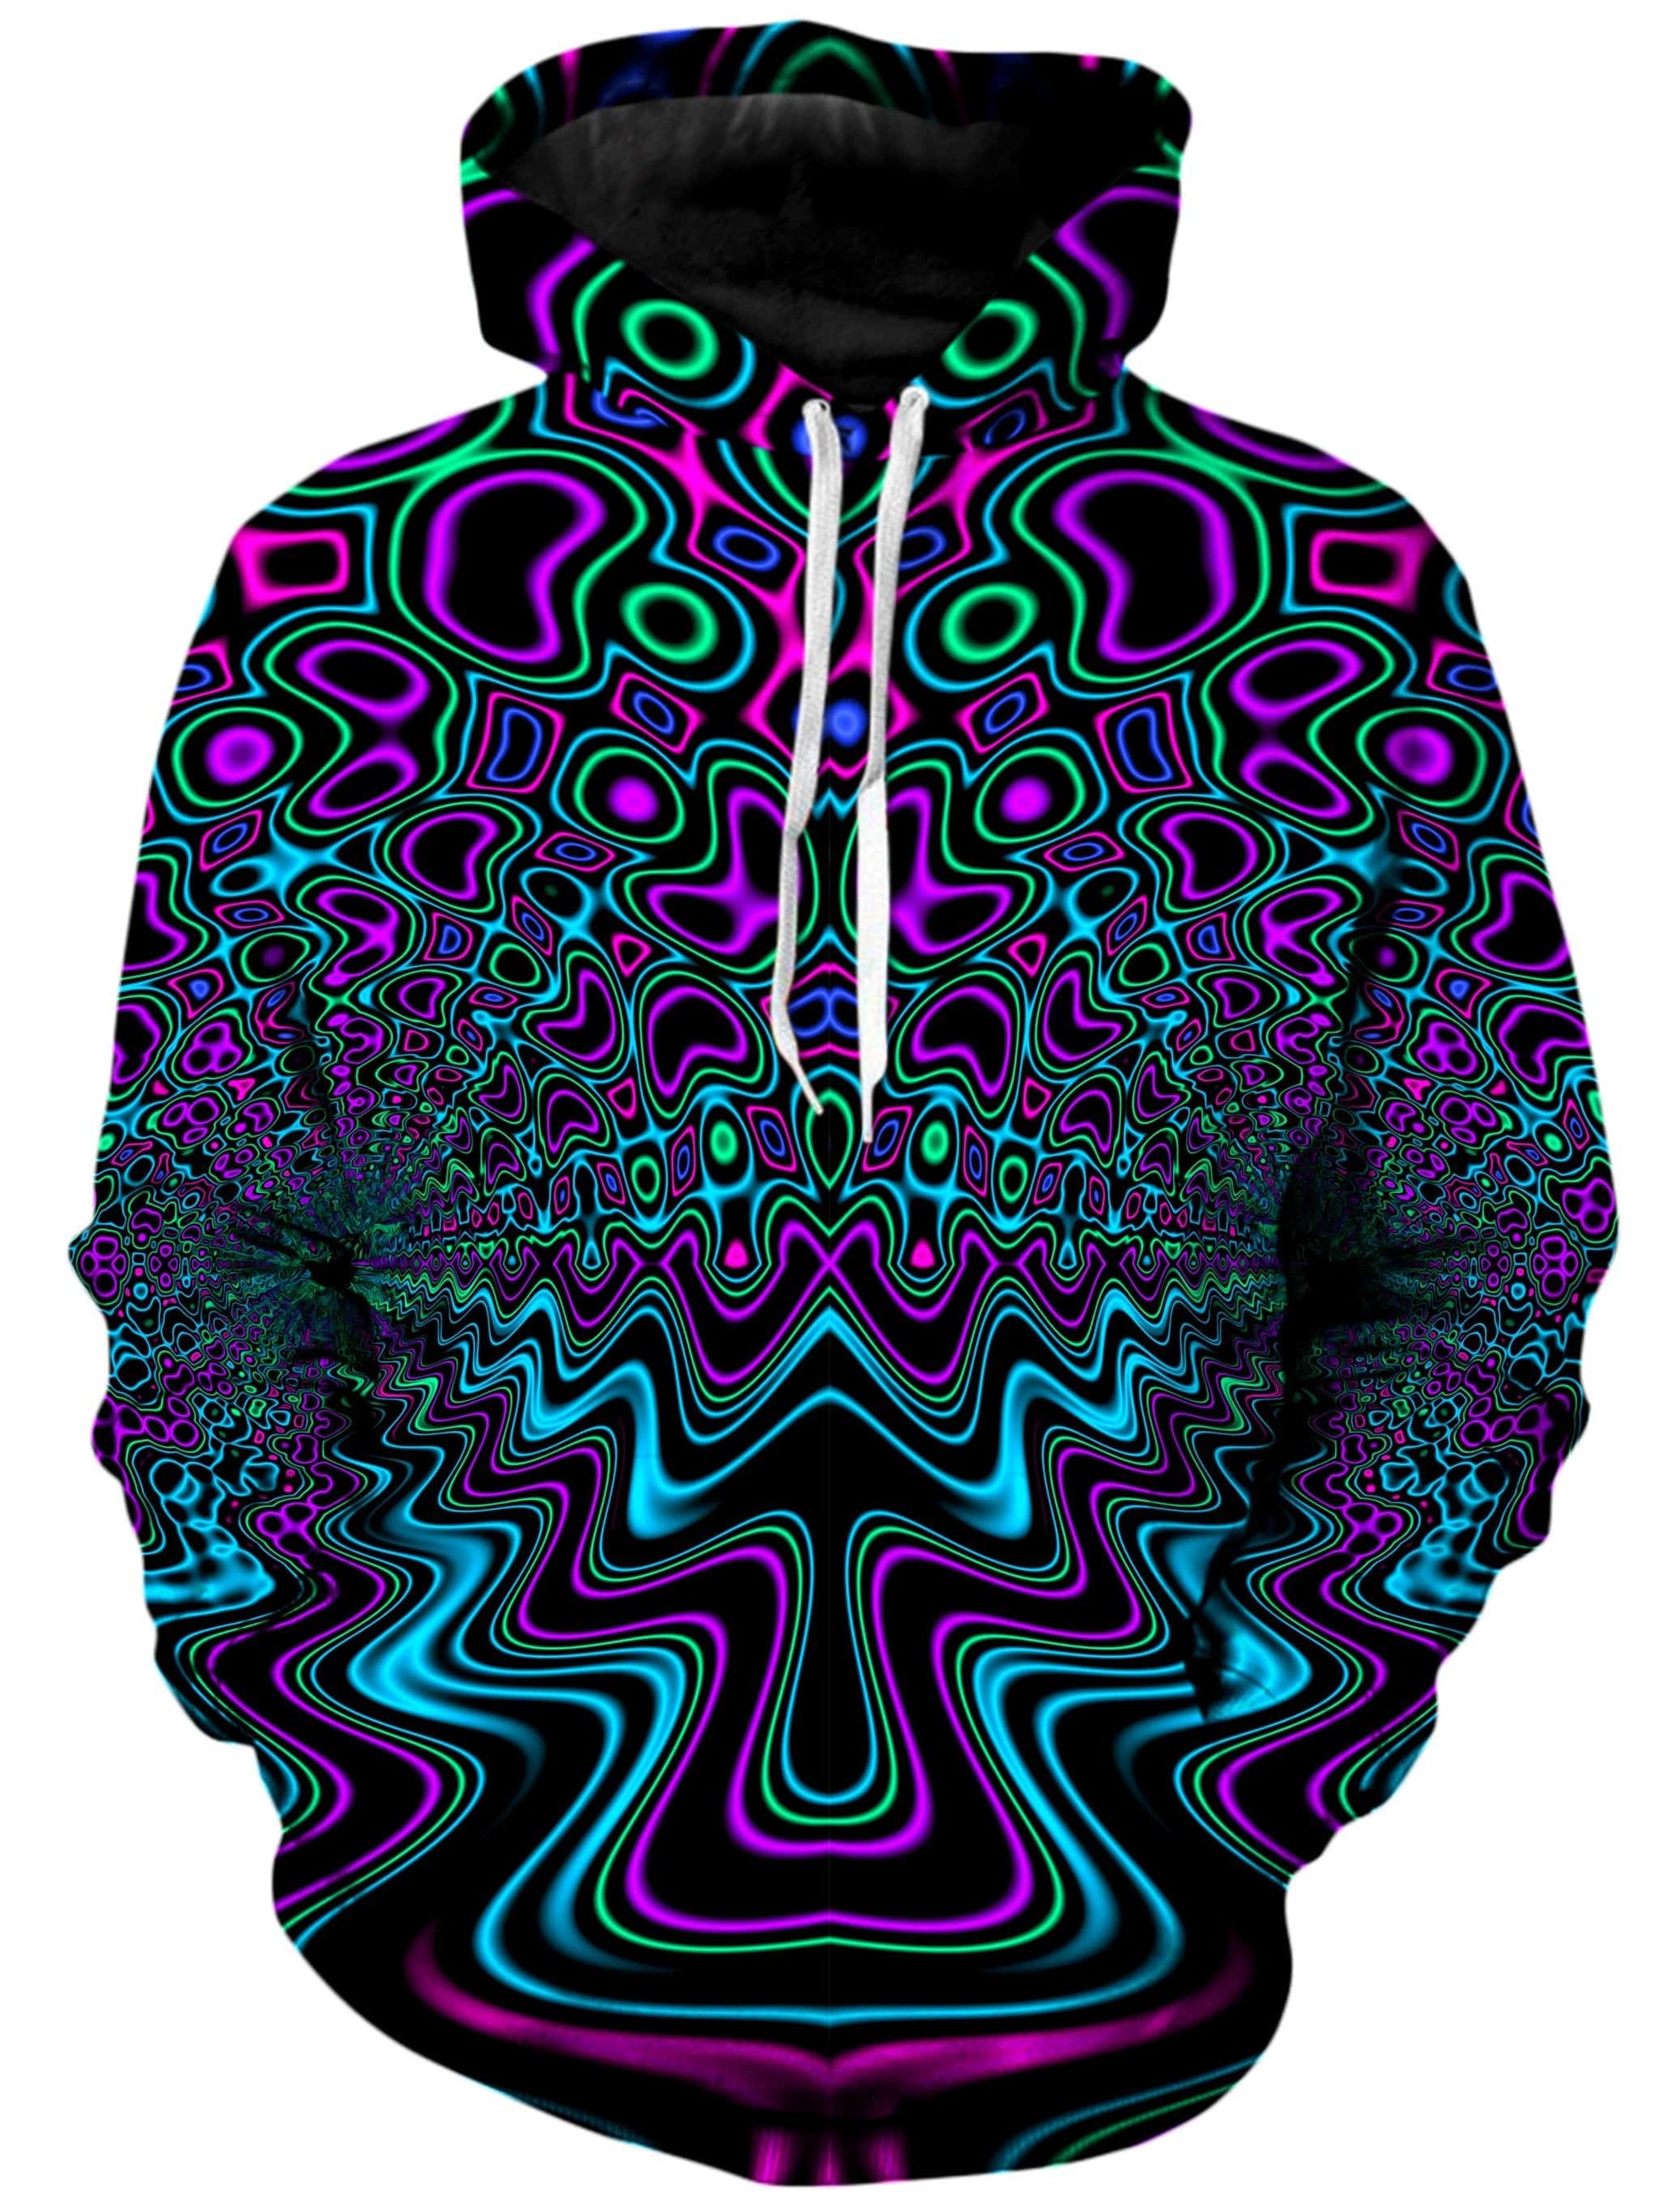 Fractal River unisex Hoodie by Psychedelic Pourhouse in Black - X-Small - Pullover - iEDM